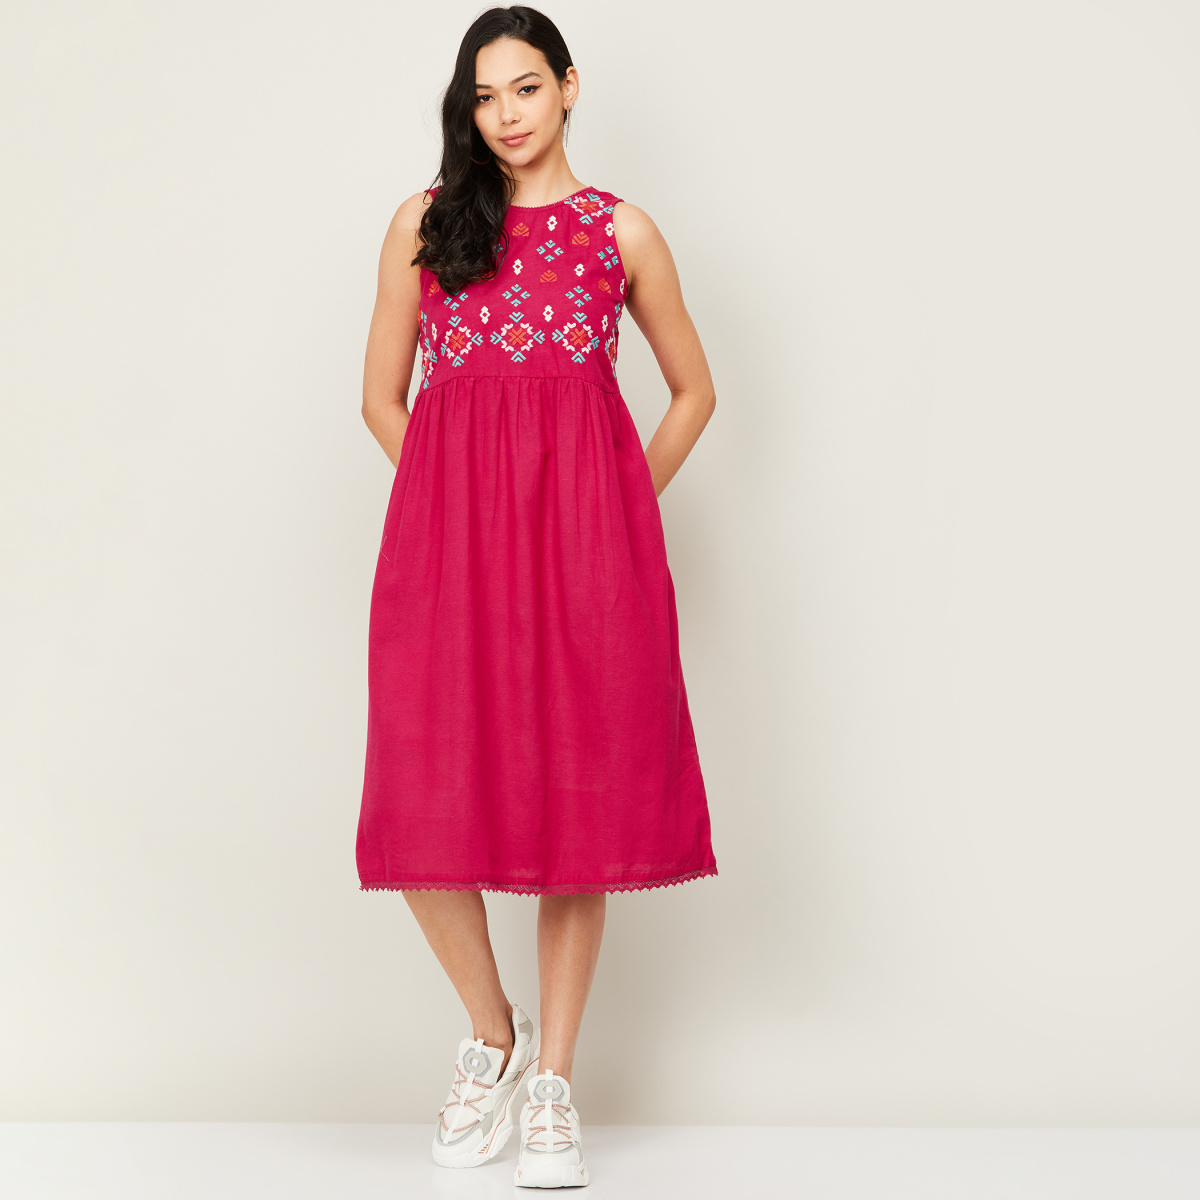 Women's Embroidered Dresses | Explore our New Arrivals | ZARA